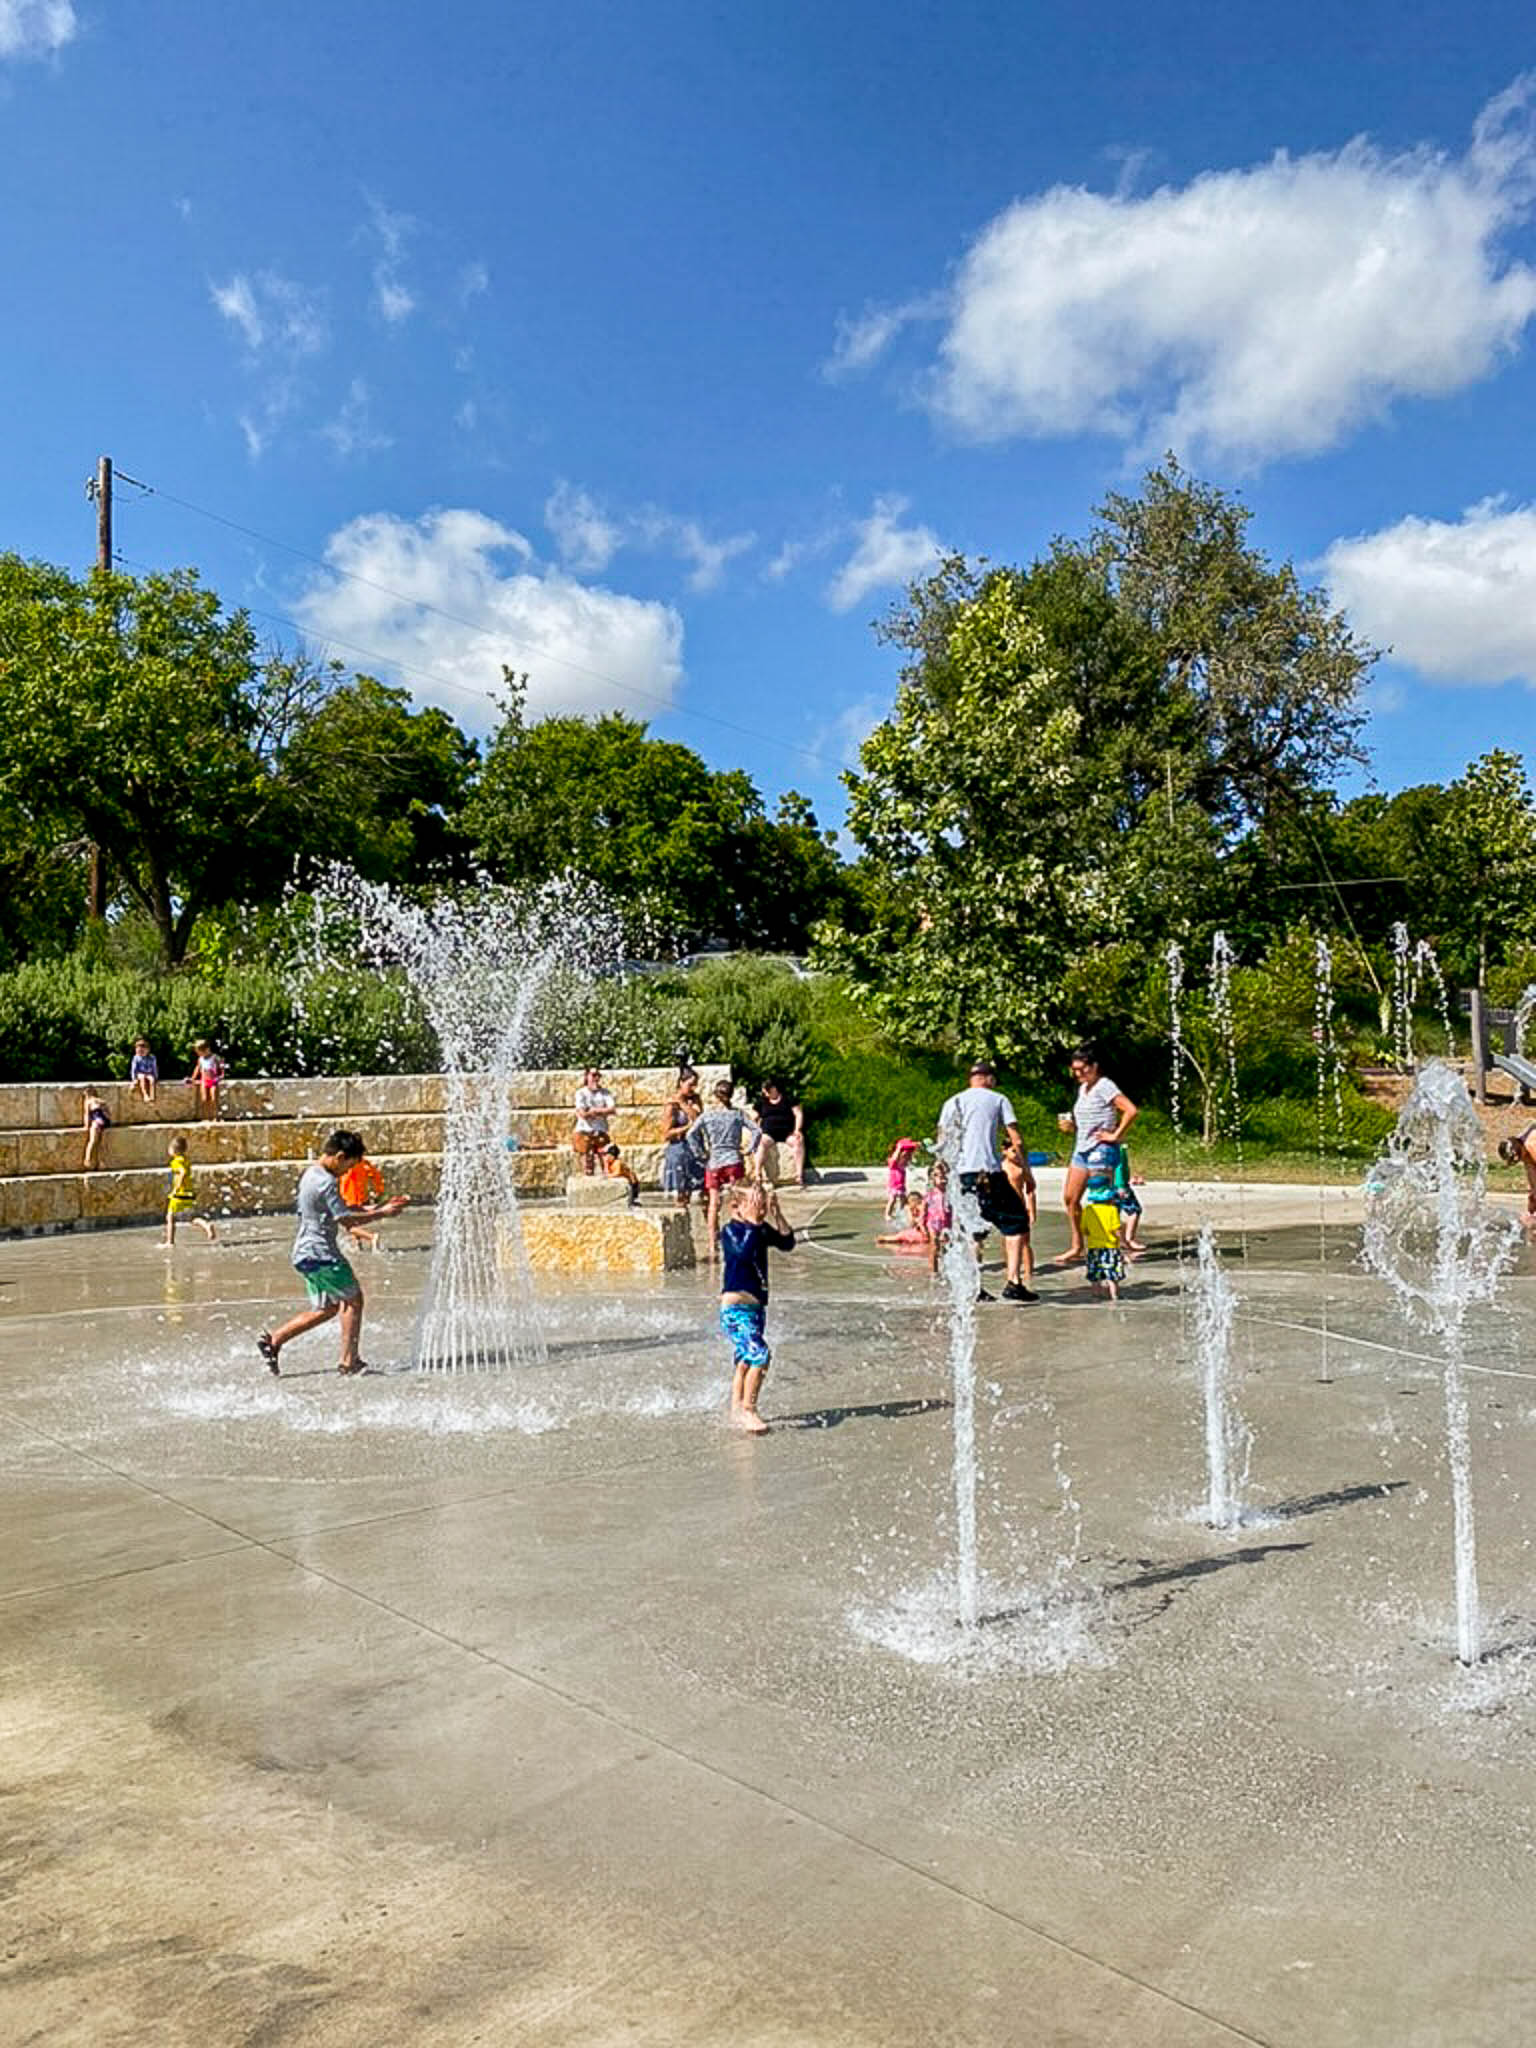 BUDA CITY PARK - 101 free things to do in ATX!